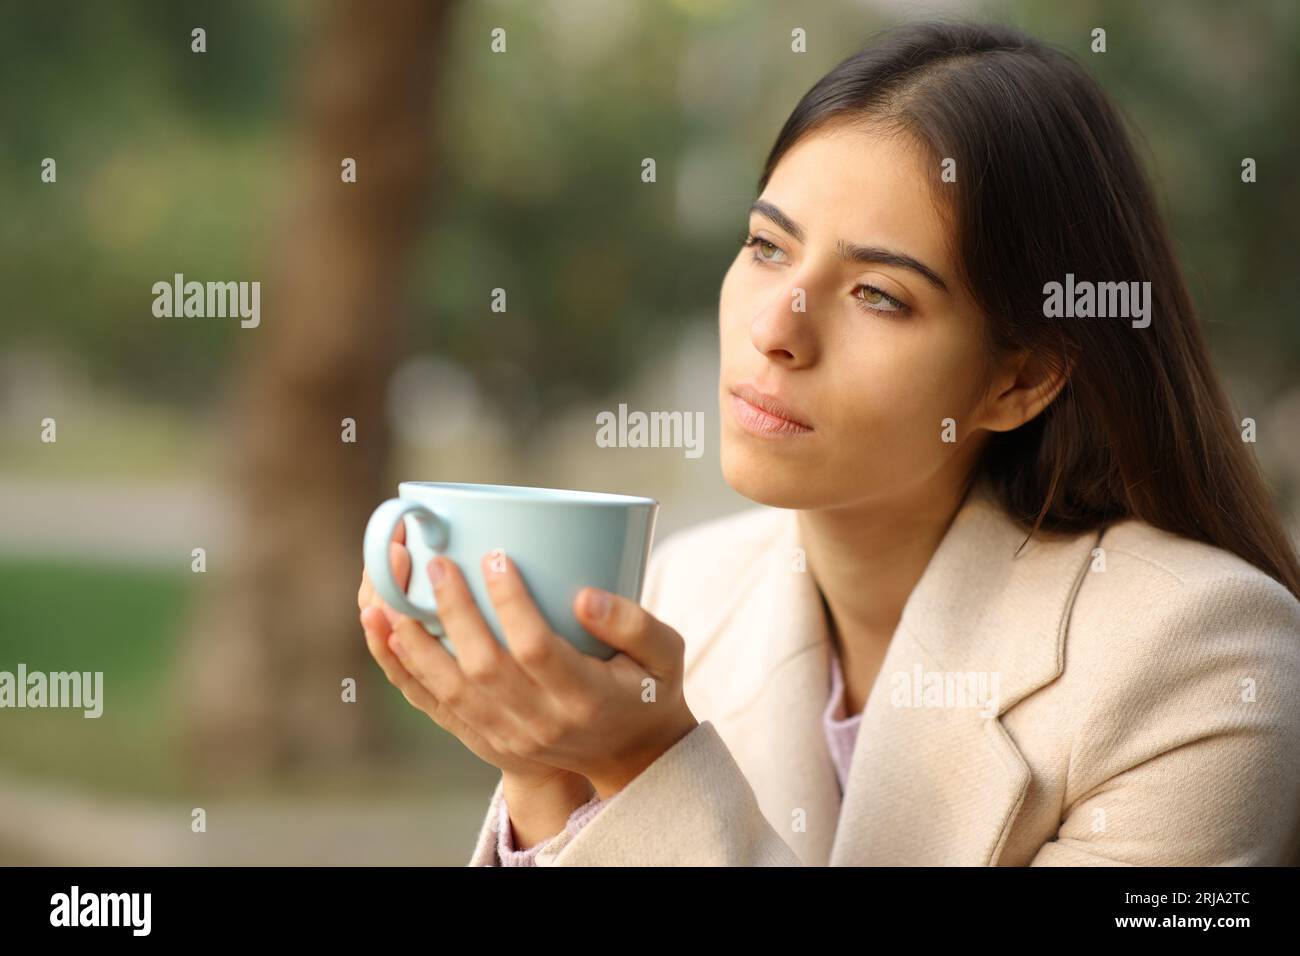 Pensive woman in winter holding coffee mug in a park Stock Photo